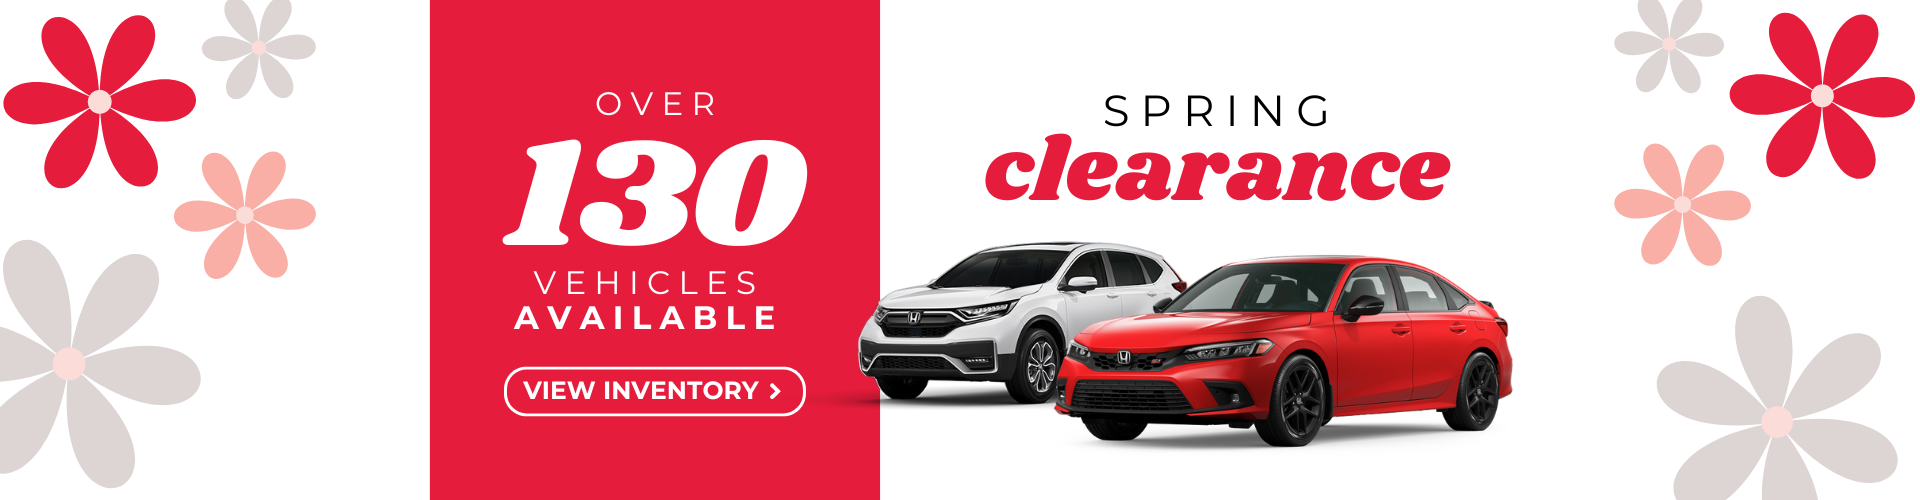 SPRING CLEARANCE